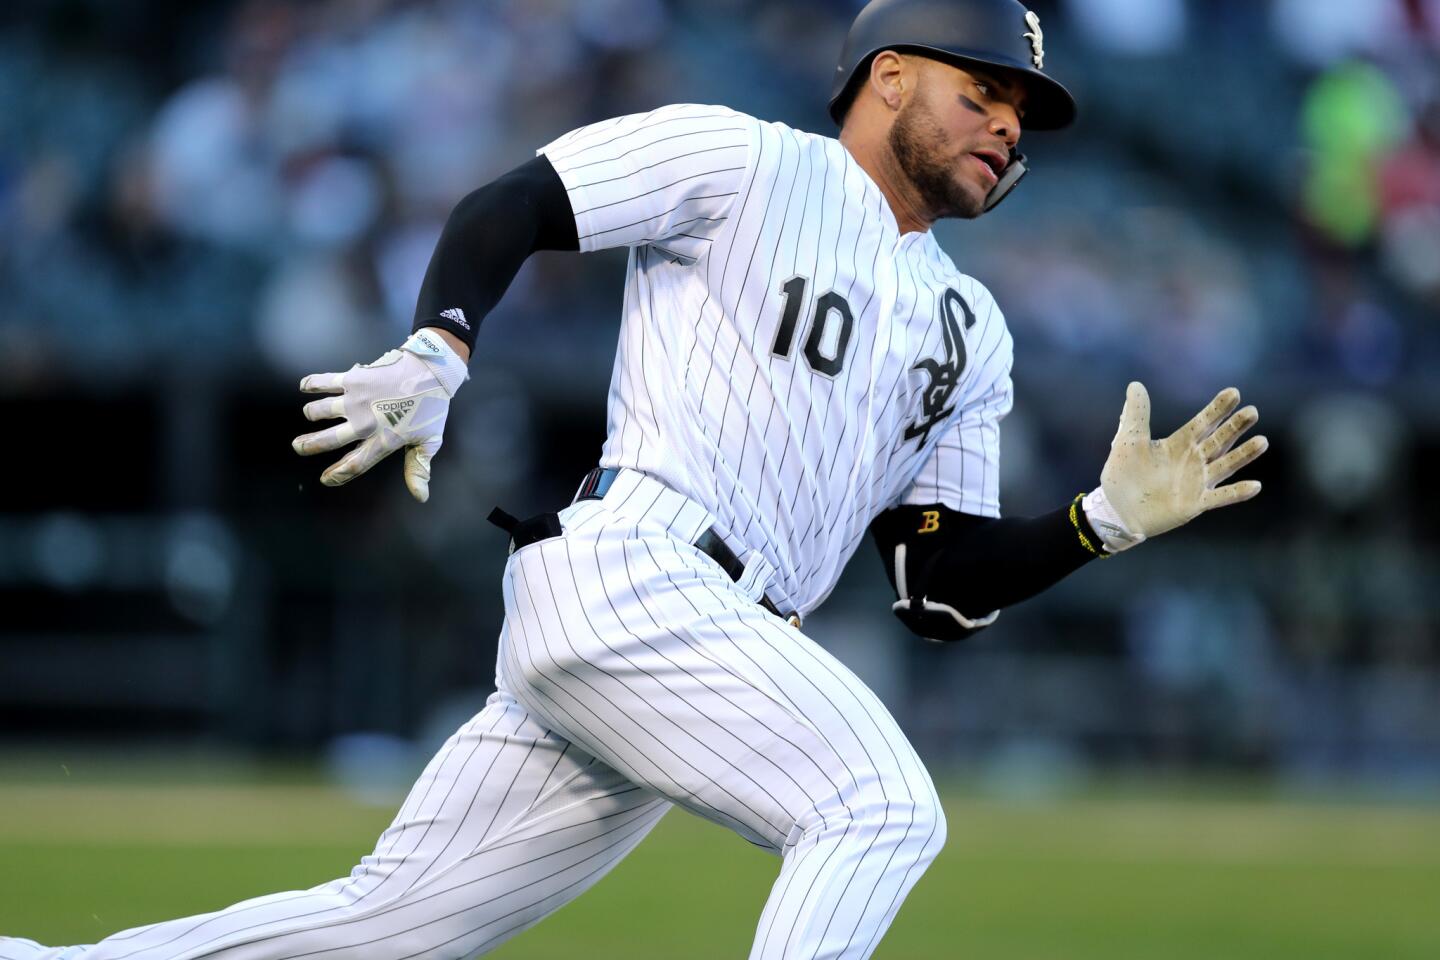 White Sox second baseman Yoan Moncada (10) sprints around first base en route to a double in the seventh inning against the Mariners at Guaranteed Rate Field on Tuesday, April 24, 2018.